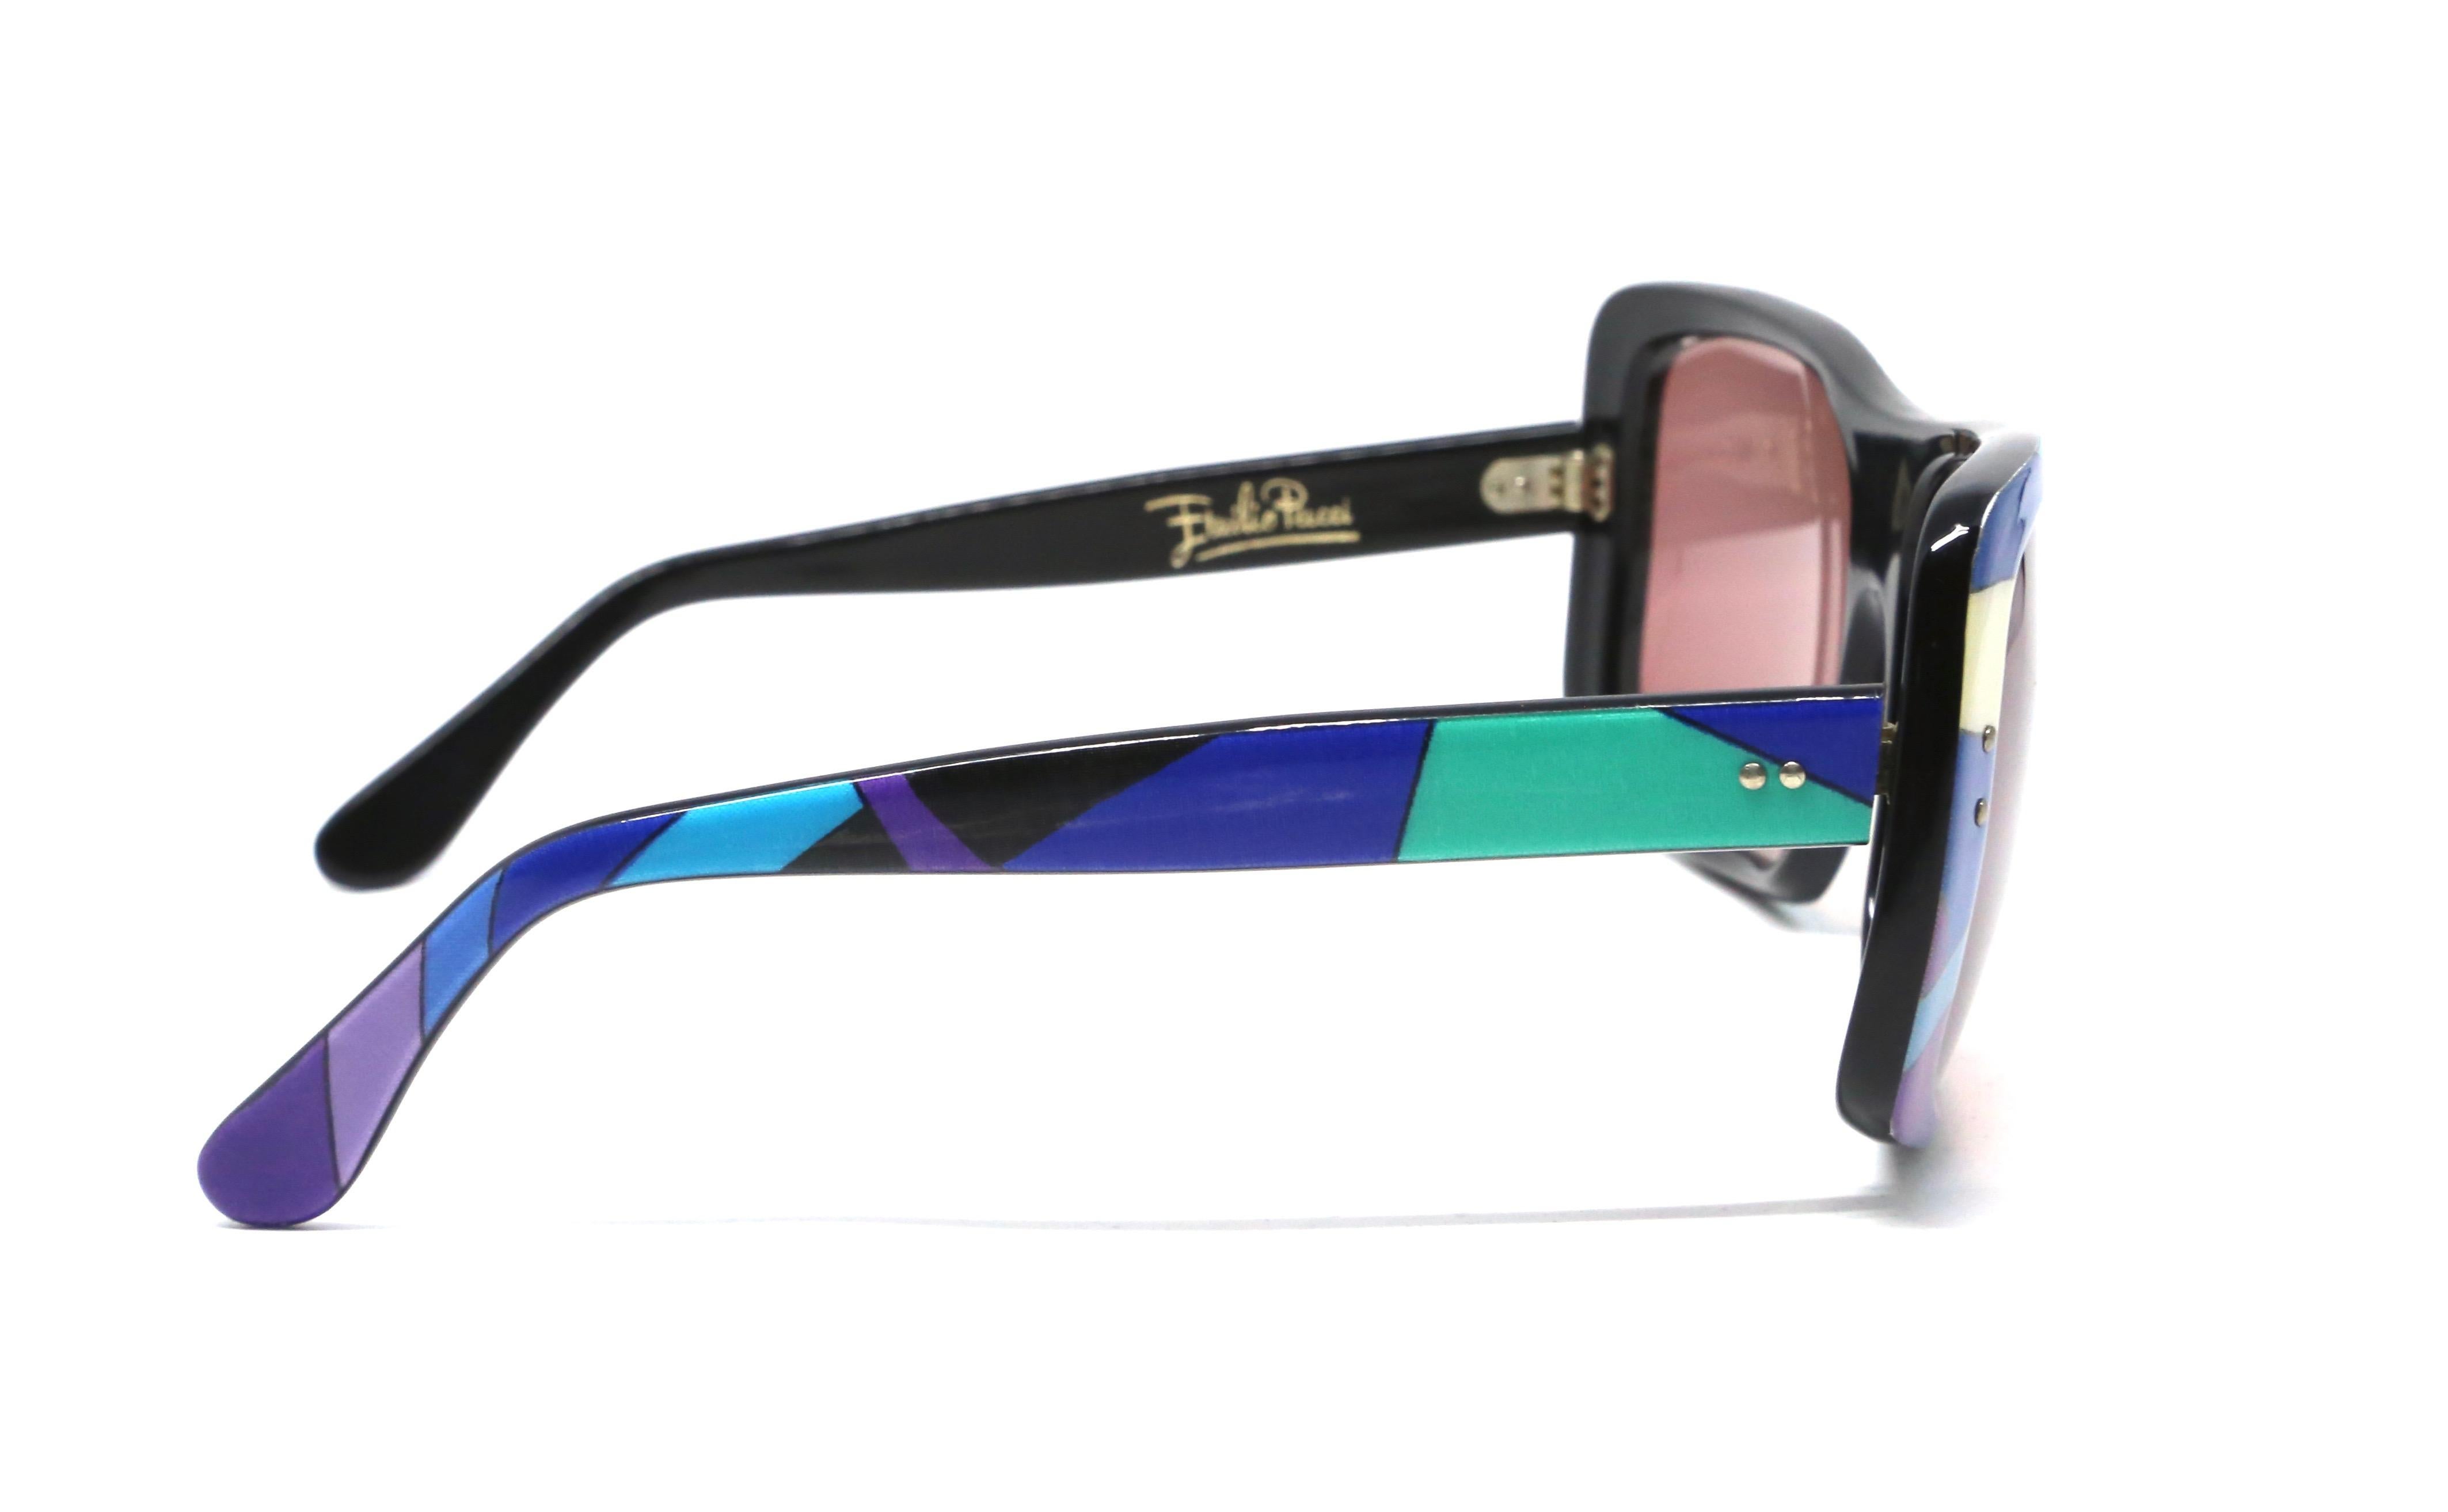 Oversized, laminate printed plastic sunglasses with rose hued lenses from Emilio Pucci dating to the 1960's. Sunglasses measure approximately 6.5